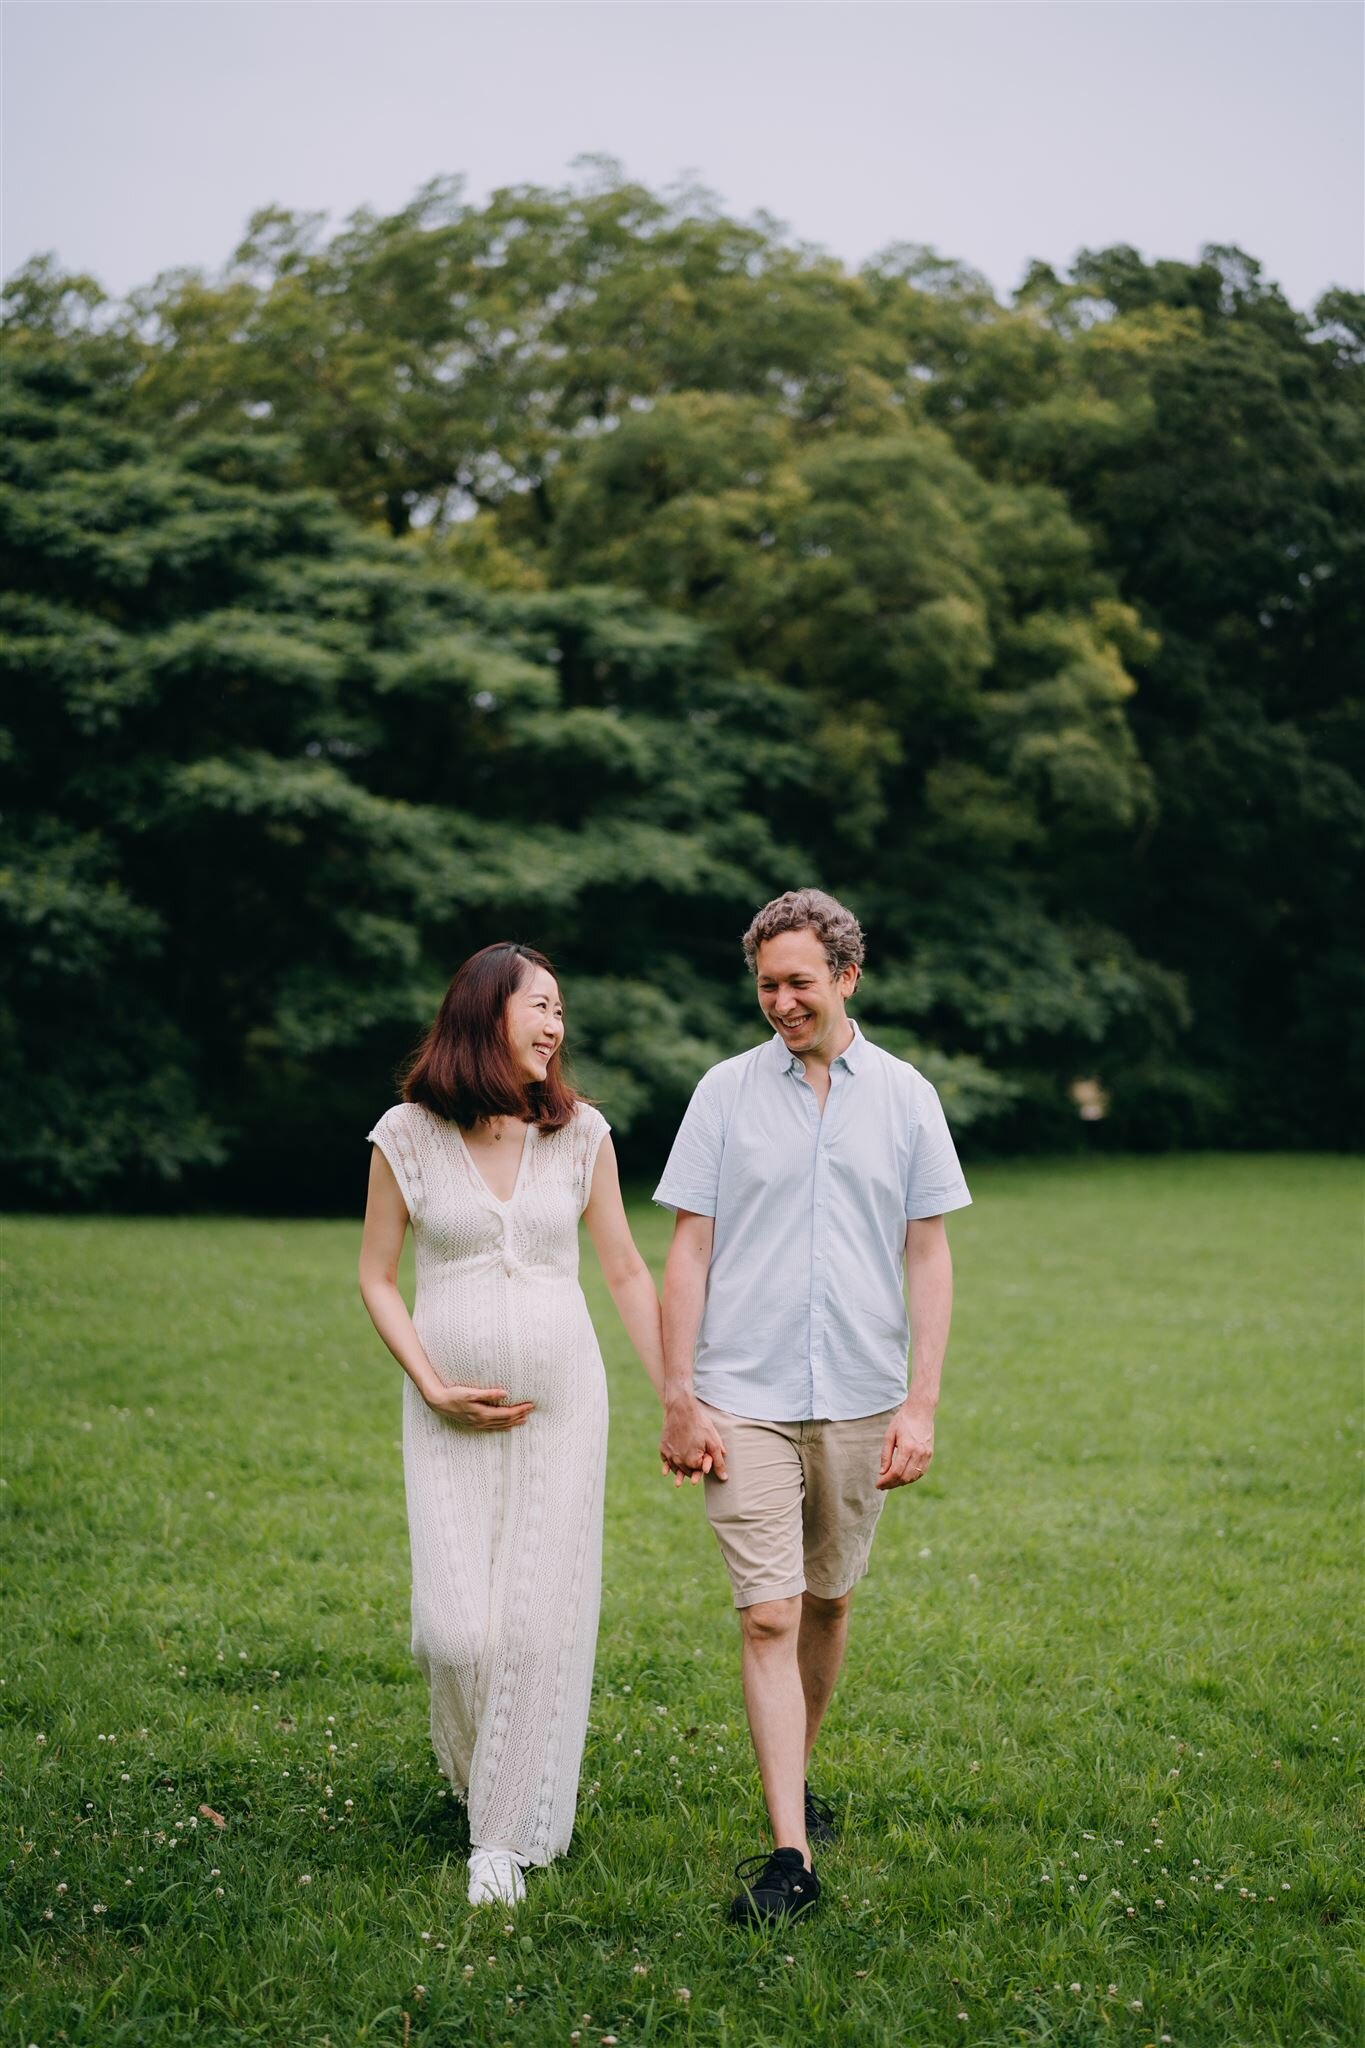 Maternity Portrait Photography in Tokyo | Natural and Candid